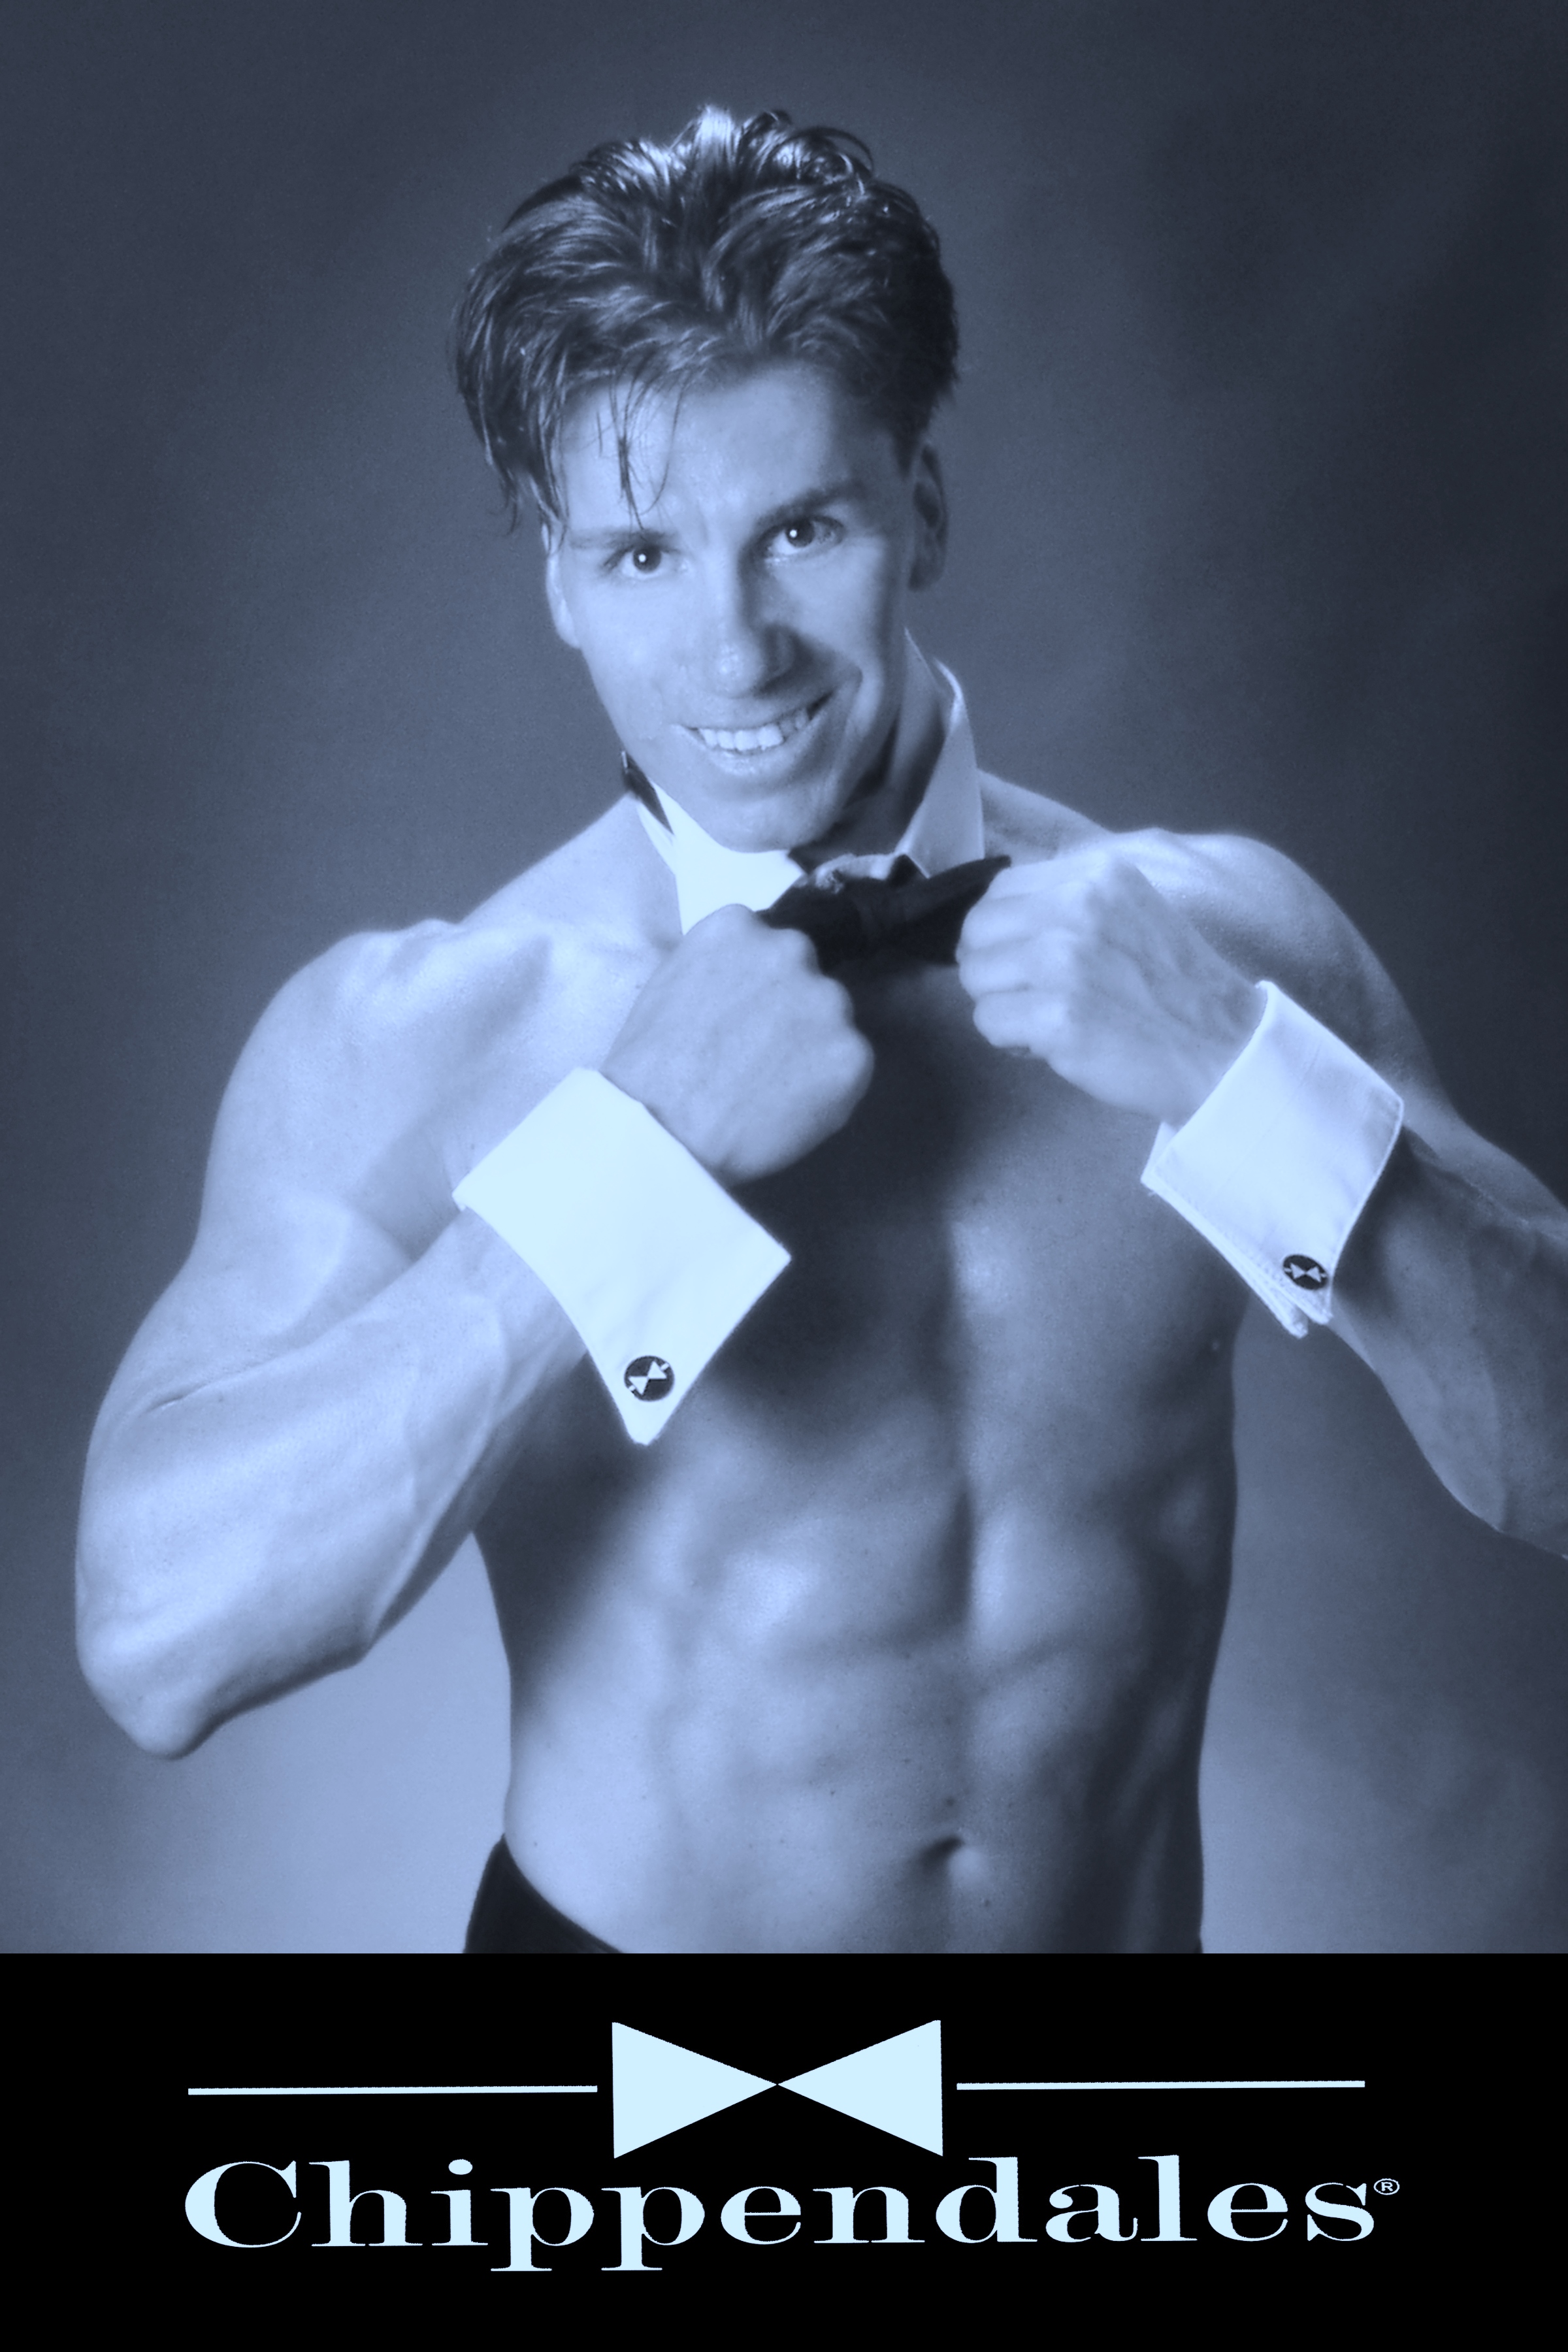 Former Chippendales Dancer Arty Nichols now living in Albuquerque NM and in San Diego CA (Also known and credited as AJ Nichols